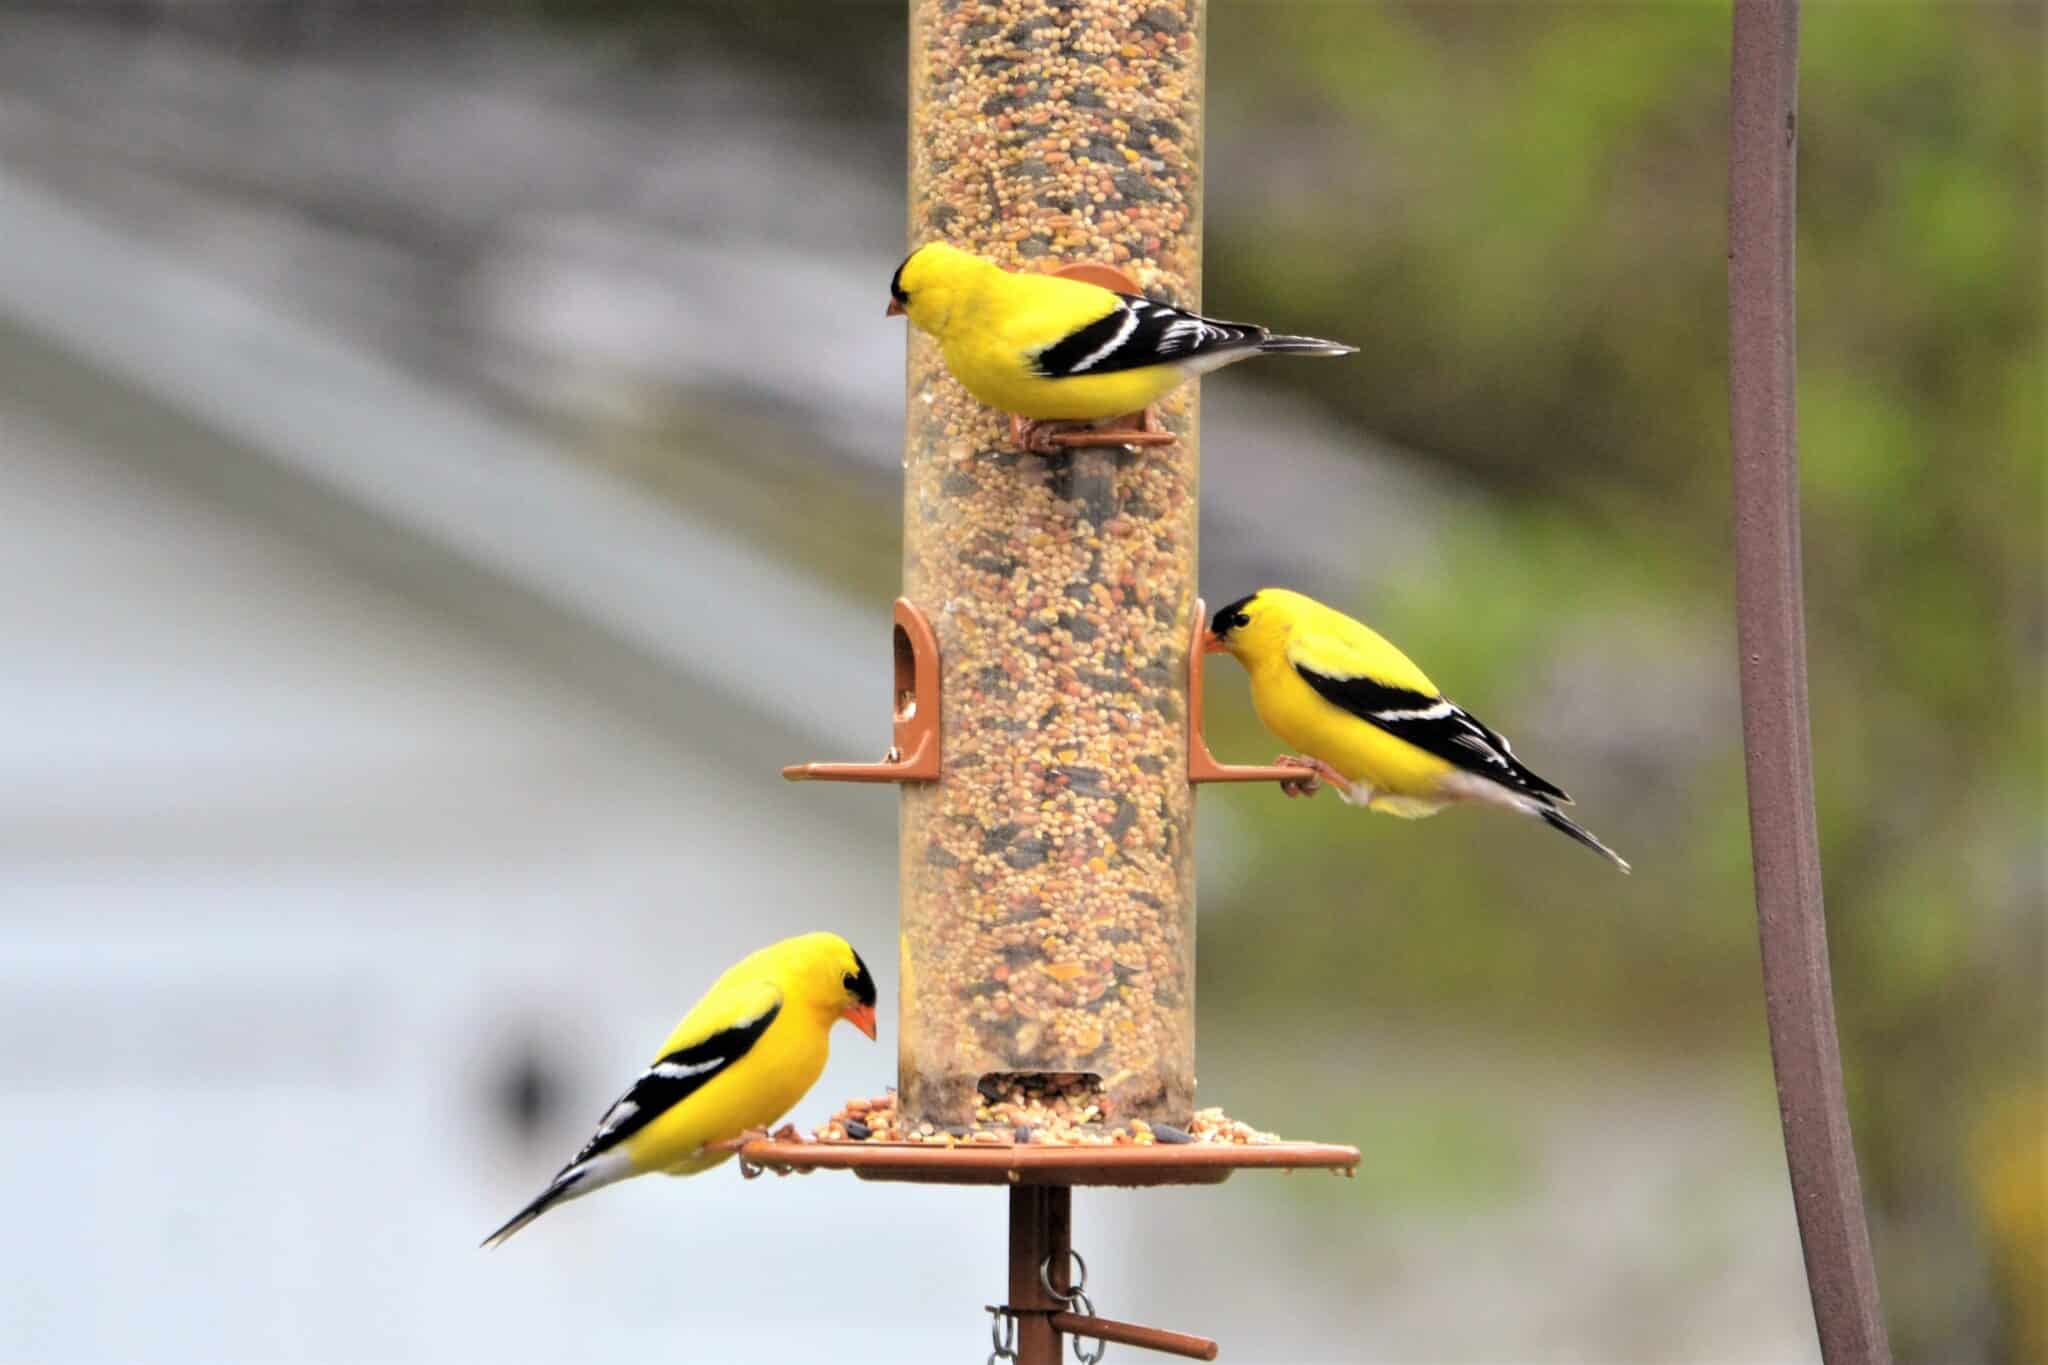 Three backyard birds are teaching an important lesson.